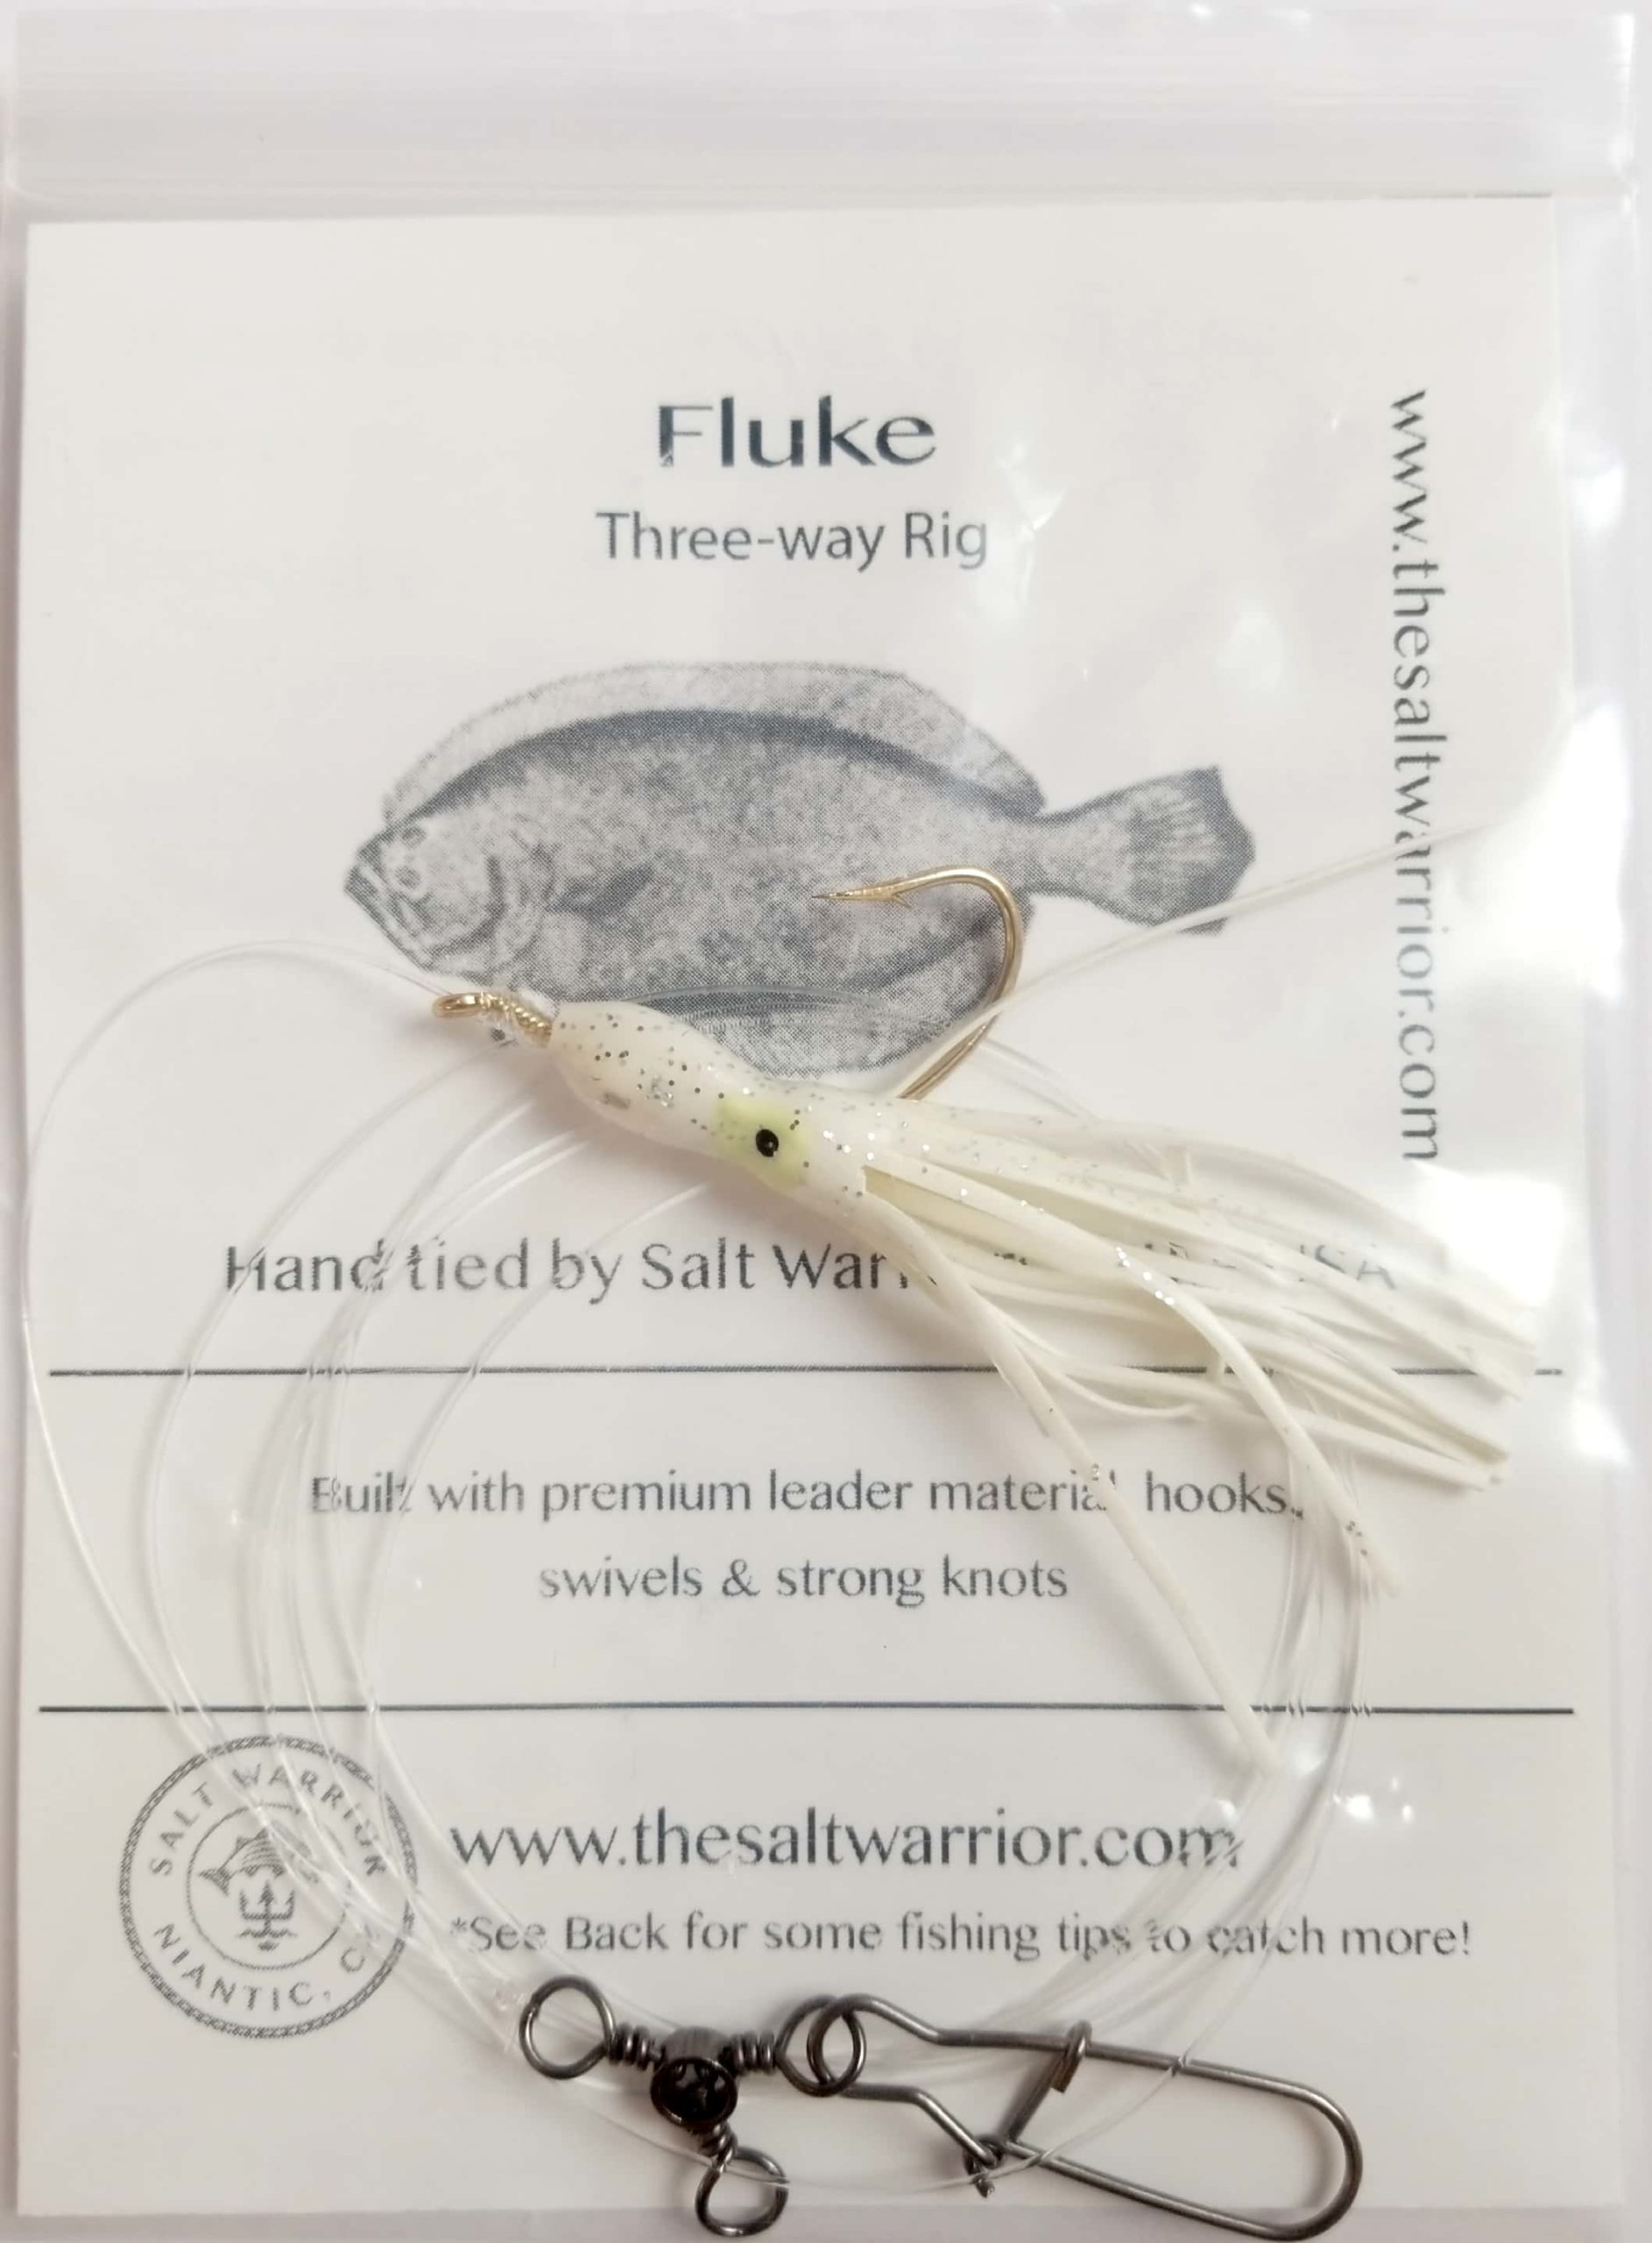 WILL KATCHUM USA HAND TIED HI/LOW SALTWATER FLUKE SEABASS 2 HOOK RIG 24" Details about   3 PACK 